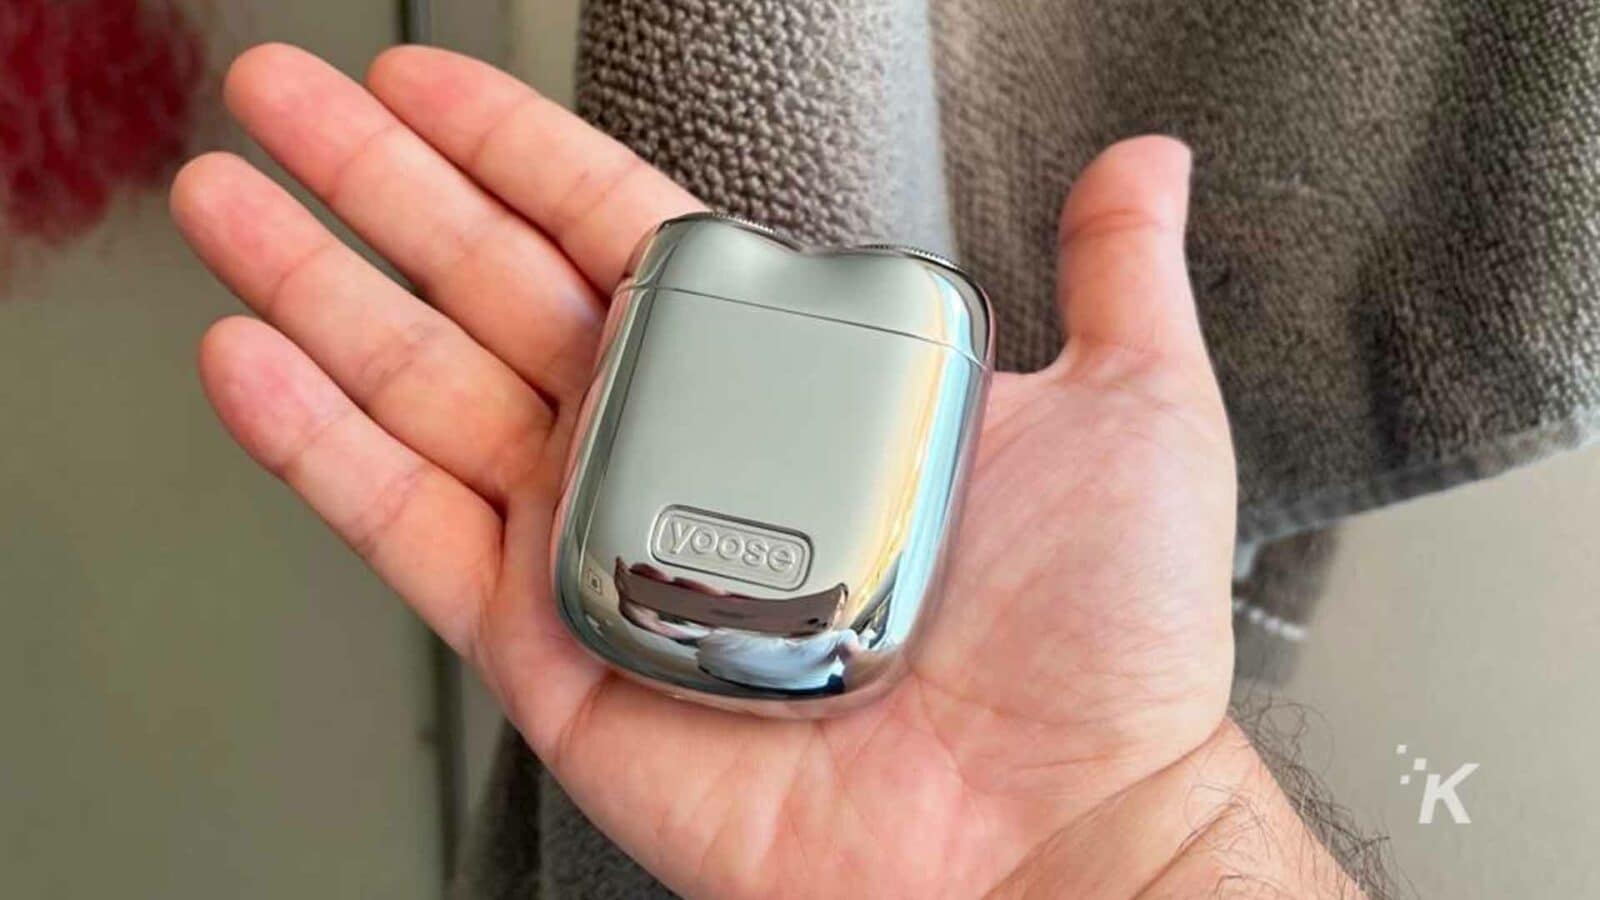 A person holds the yoose mini shaver in their hand